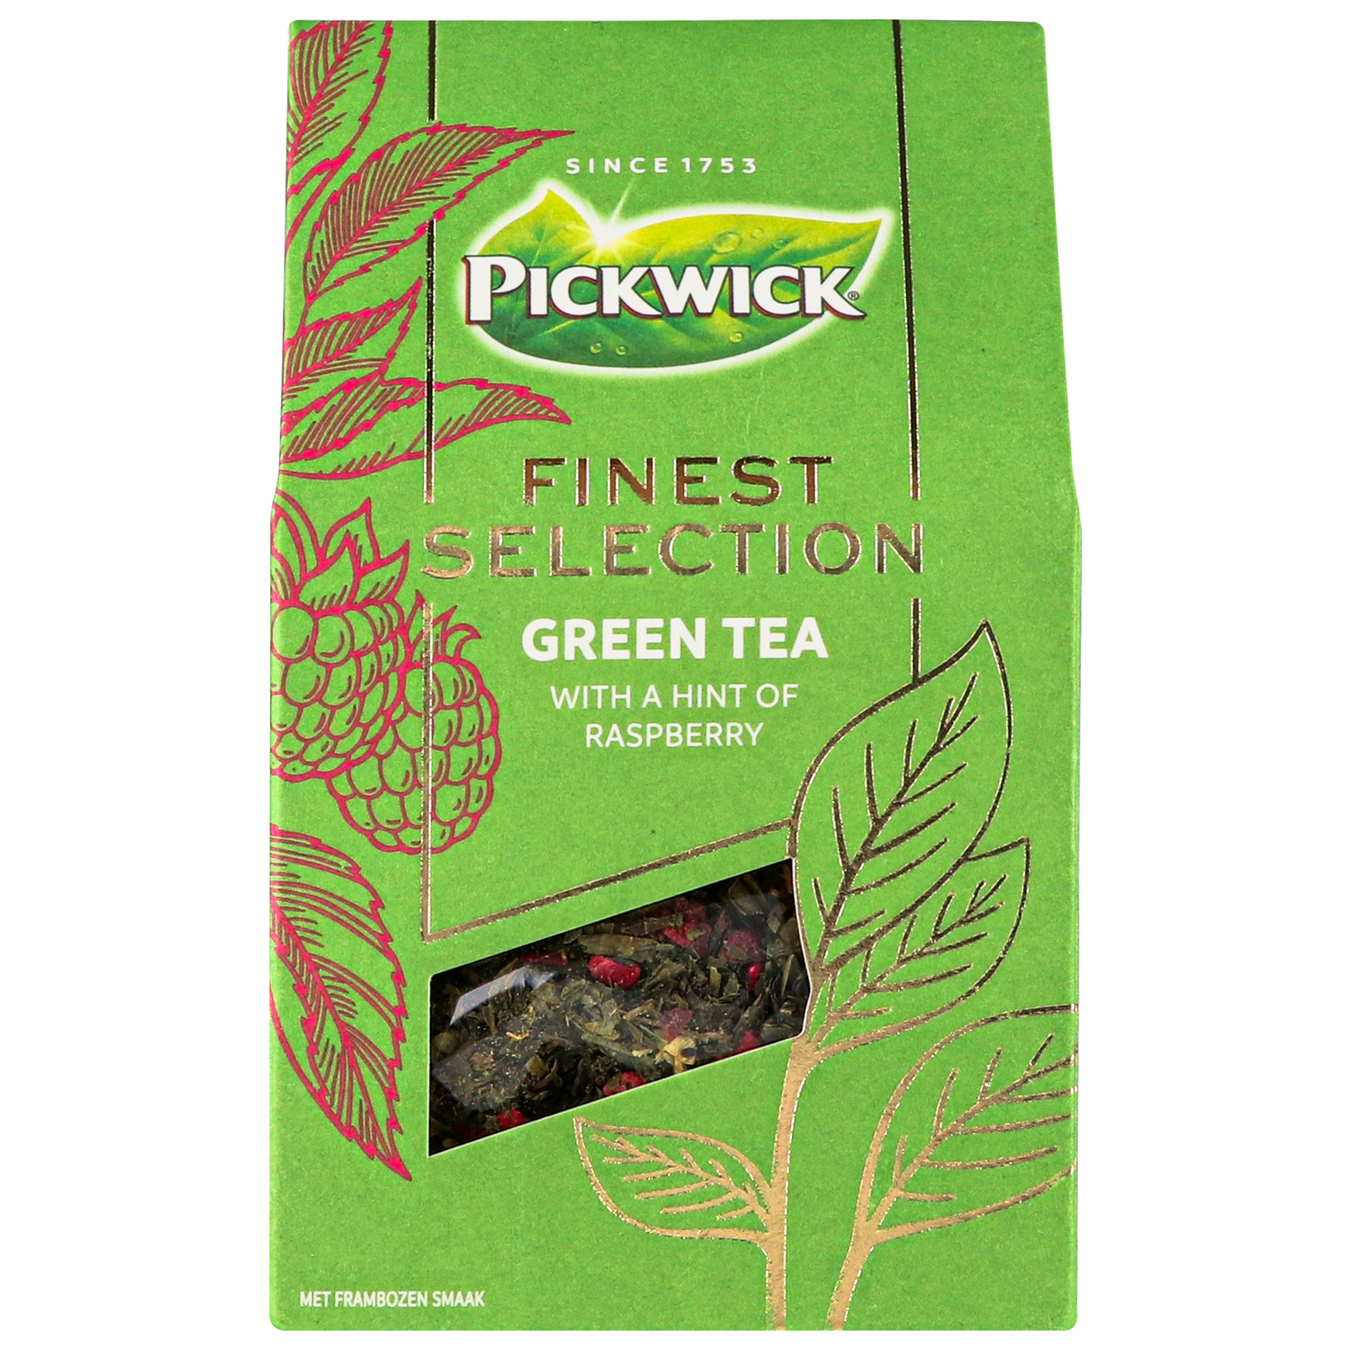 Pickwick green tea flavored with pieces of berries 50g